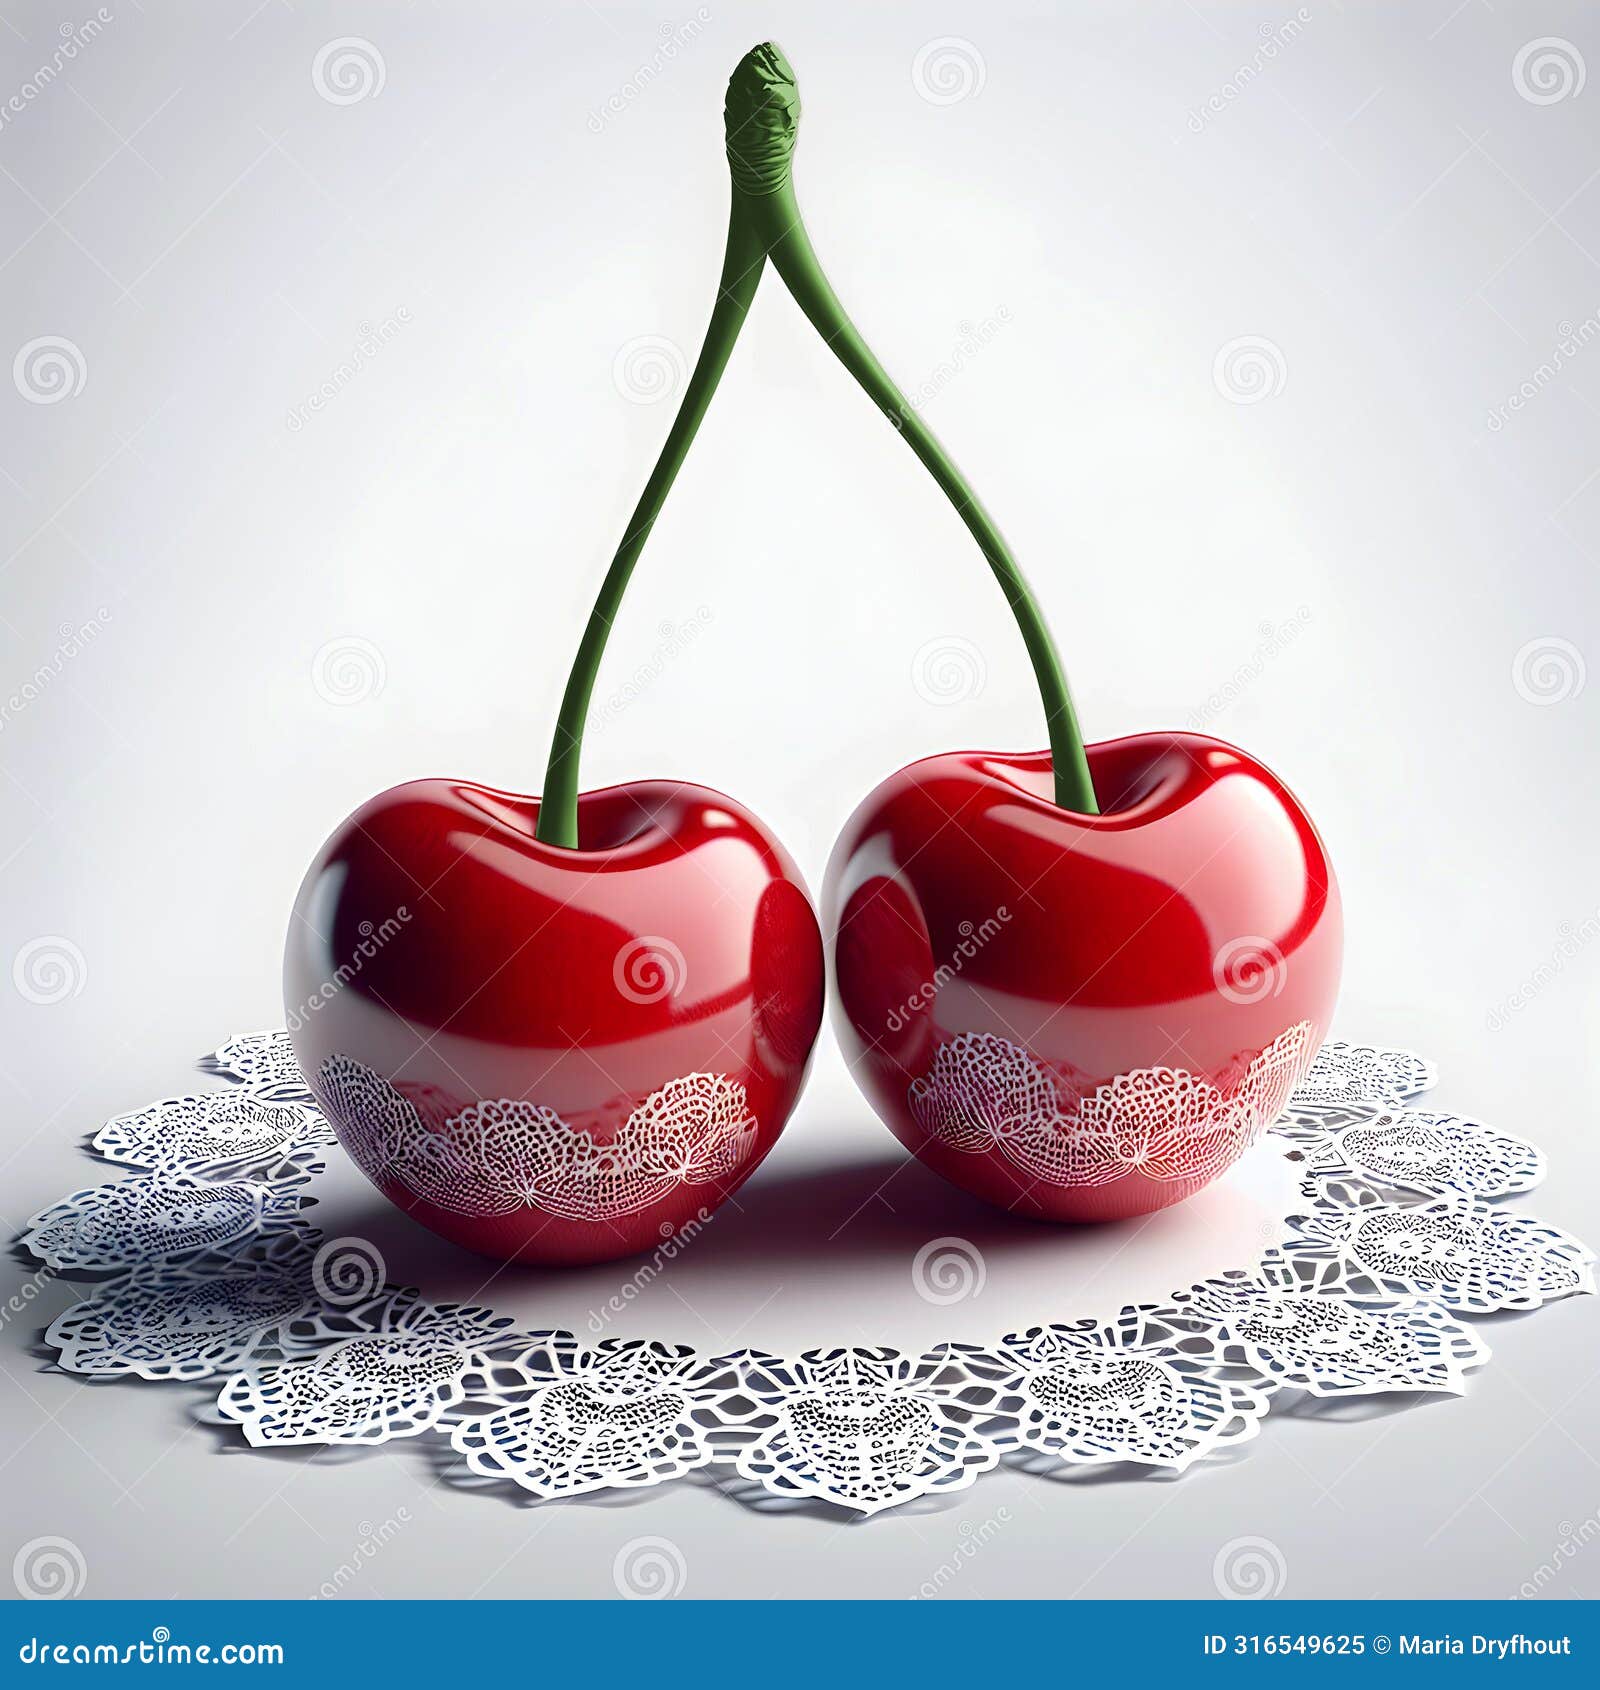 pair of red cherries on lace doily